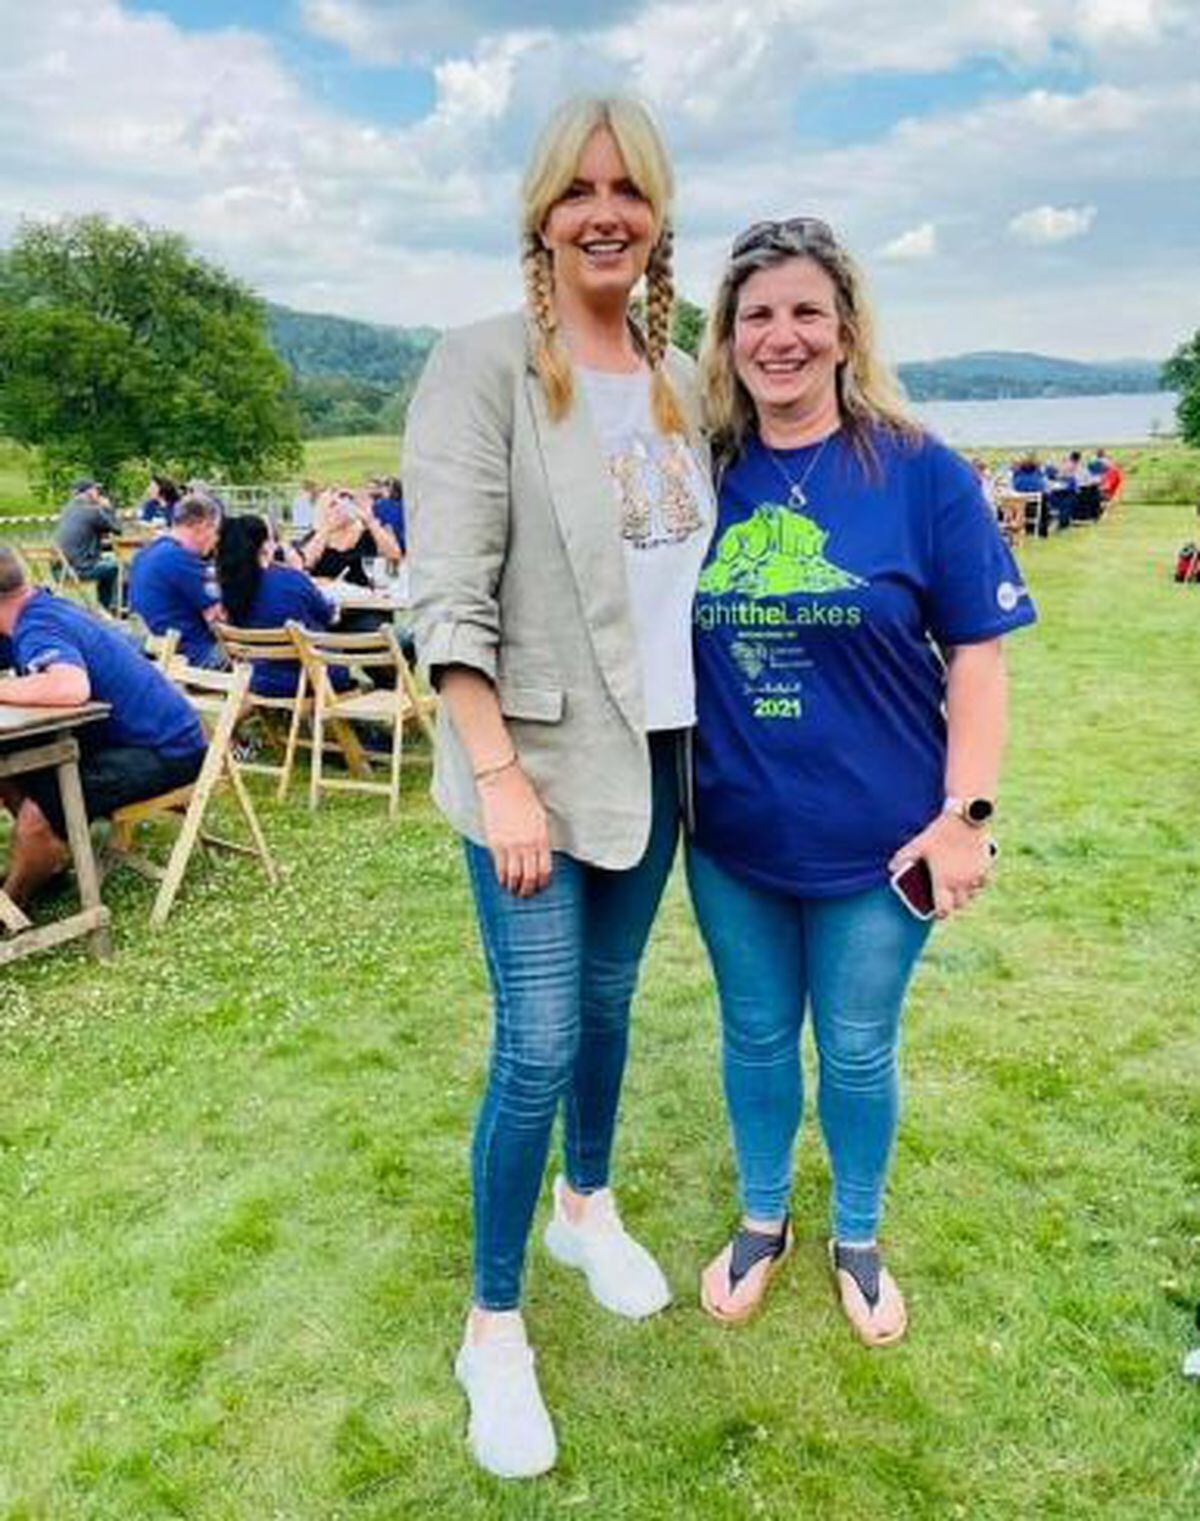 Claire Bond with Penny Lancaster after the charity climb 